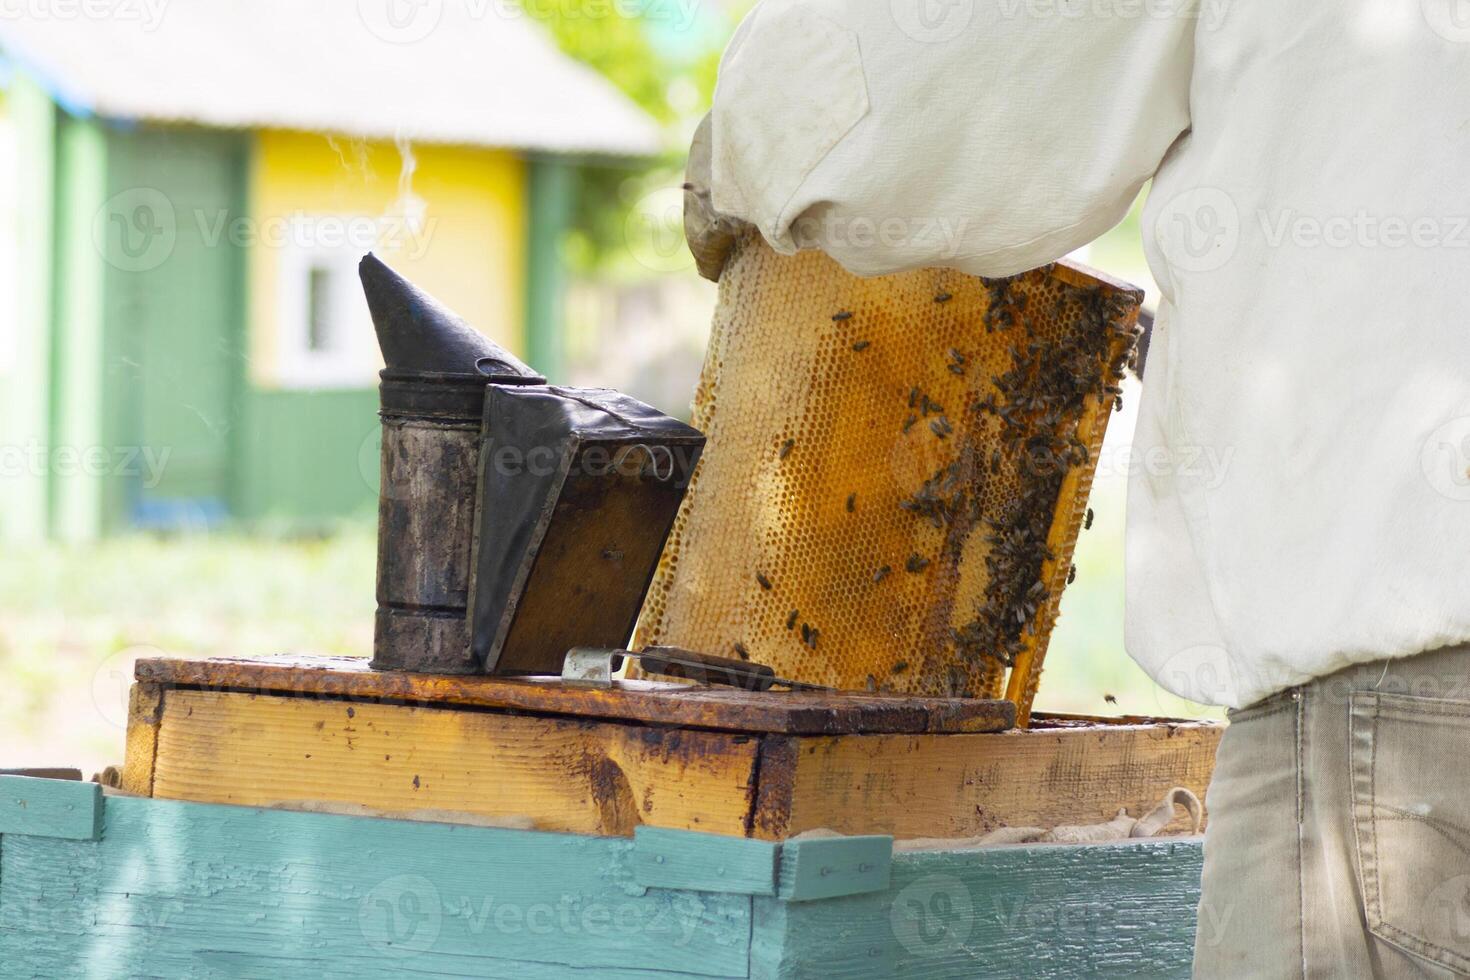 professional beekeeper in protective workwear inspecting honeycomb frame at apiary. beekeeper harvesting honey photo